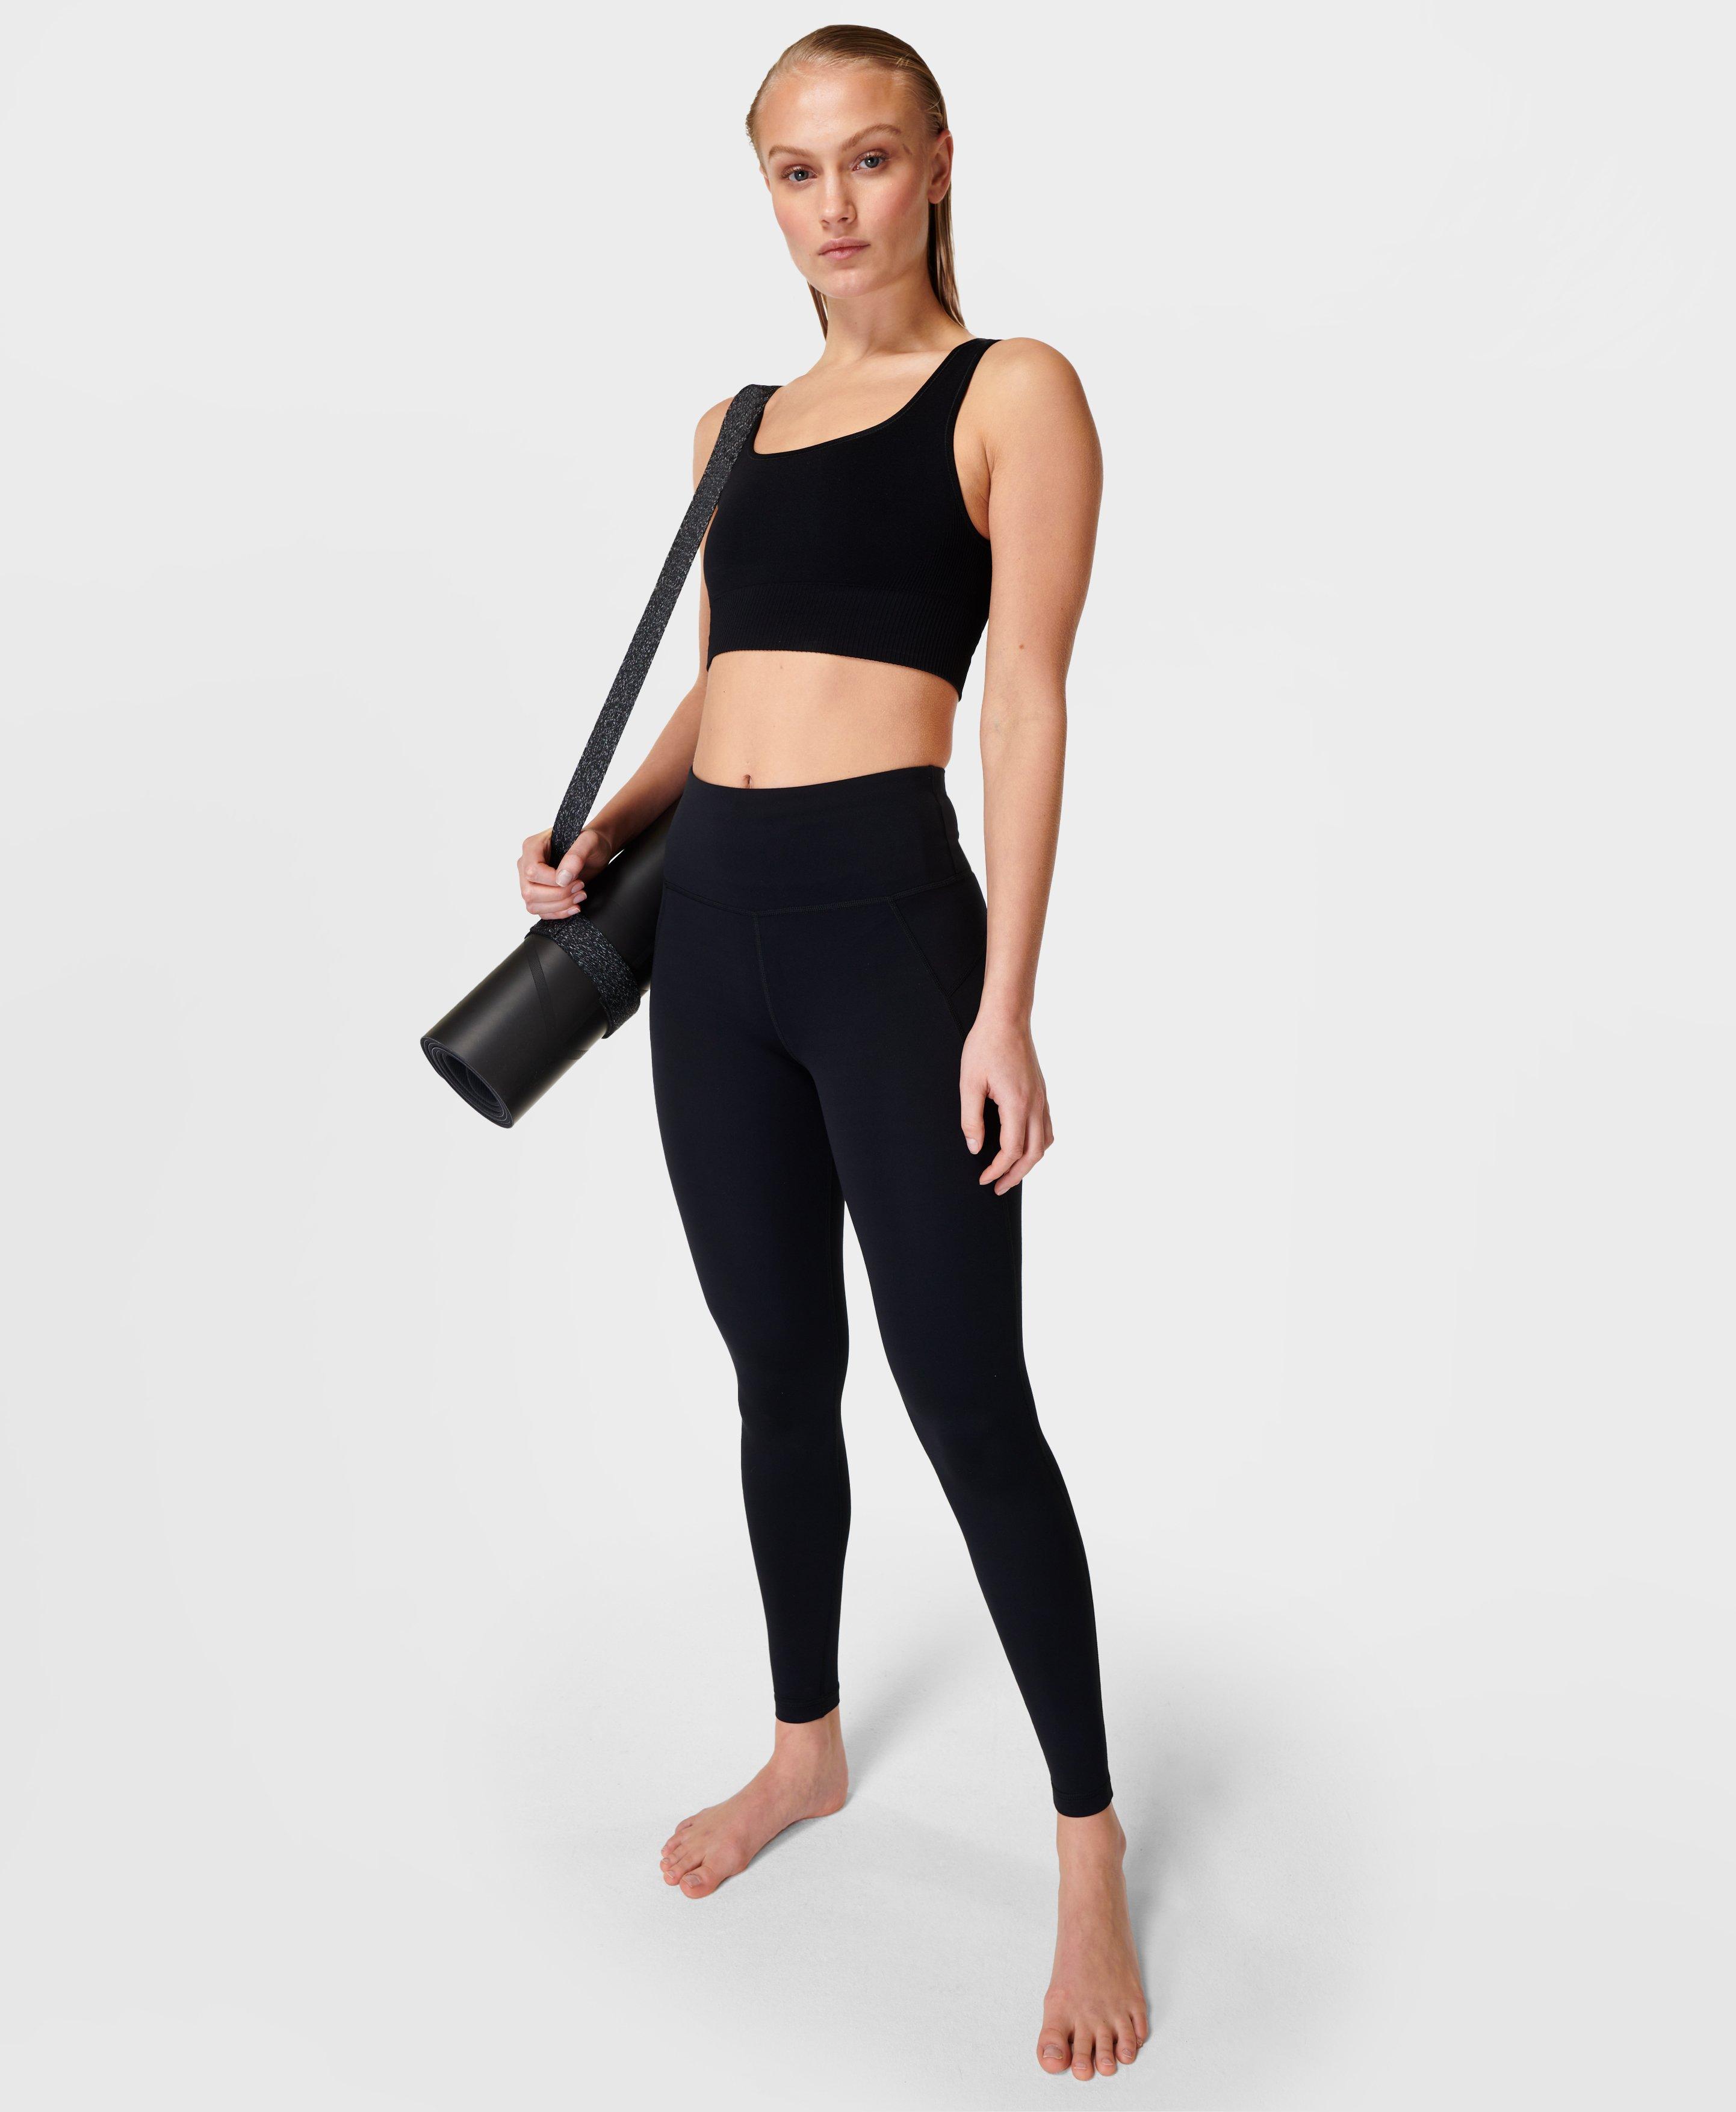 These are the 10 bestselling Sweaty Betty products